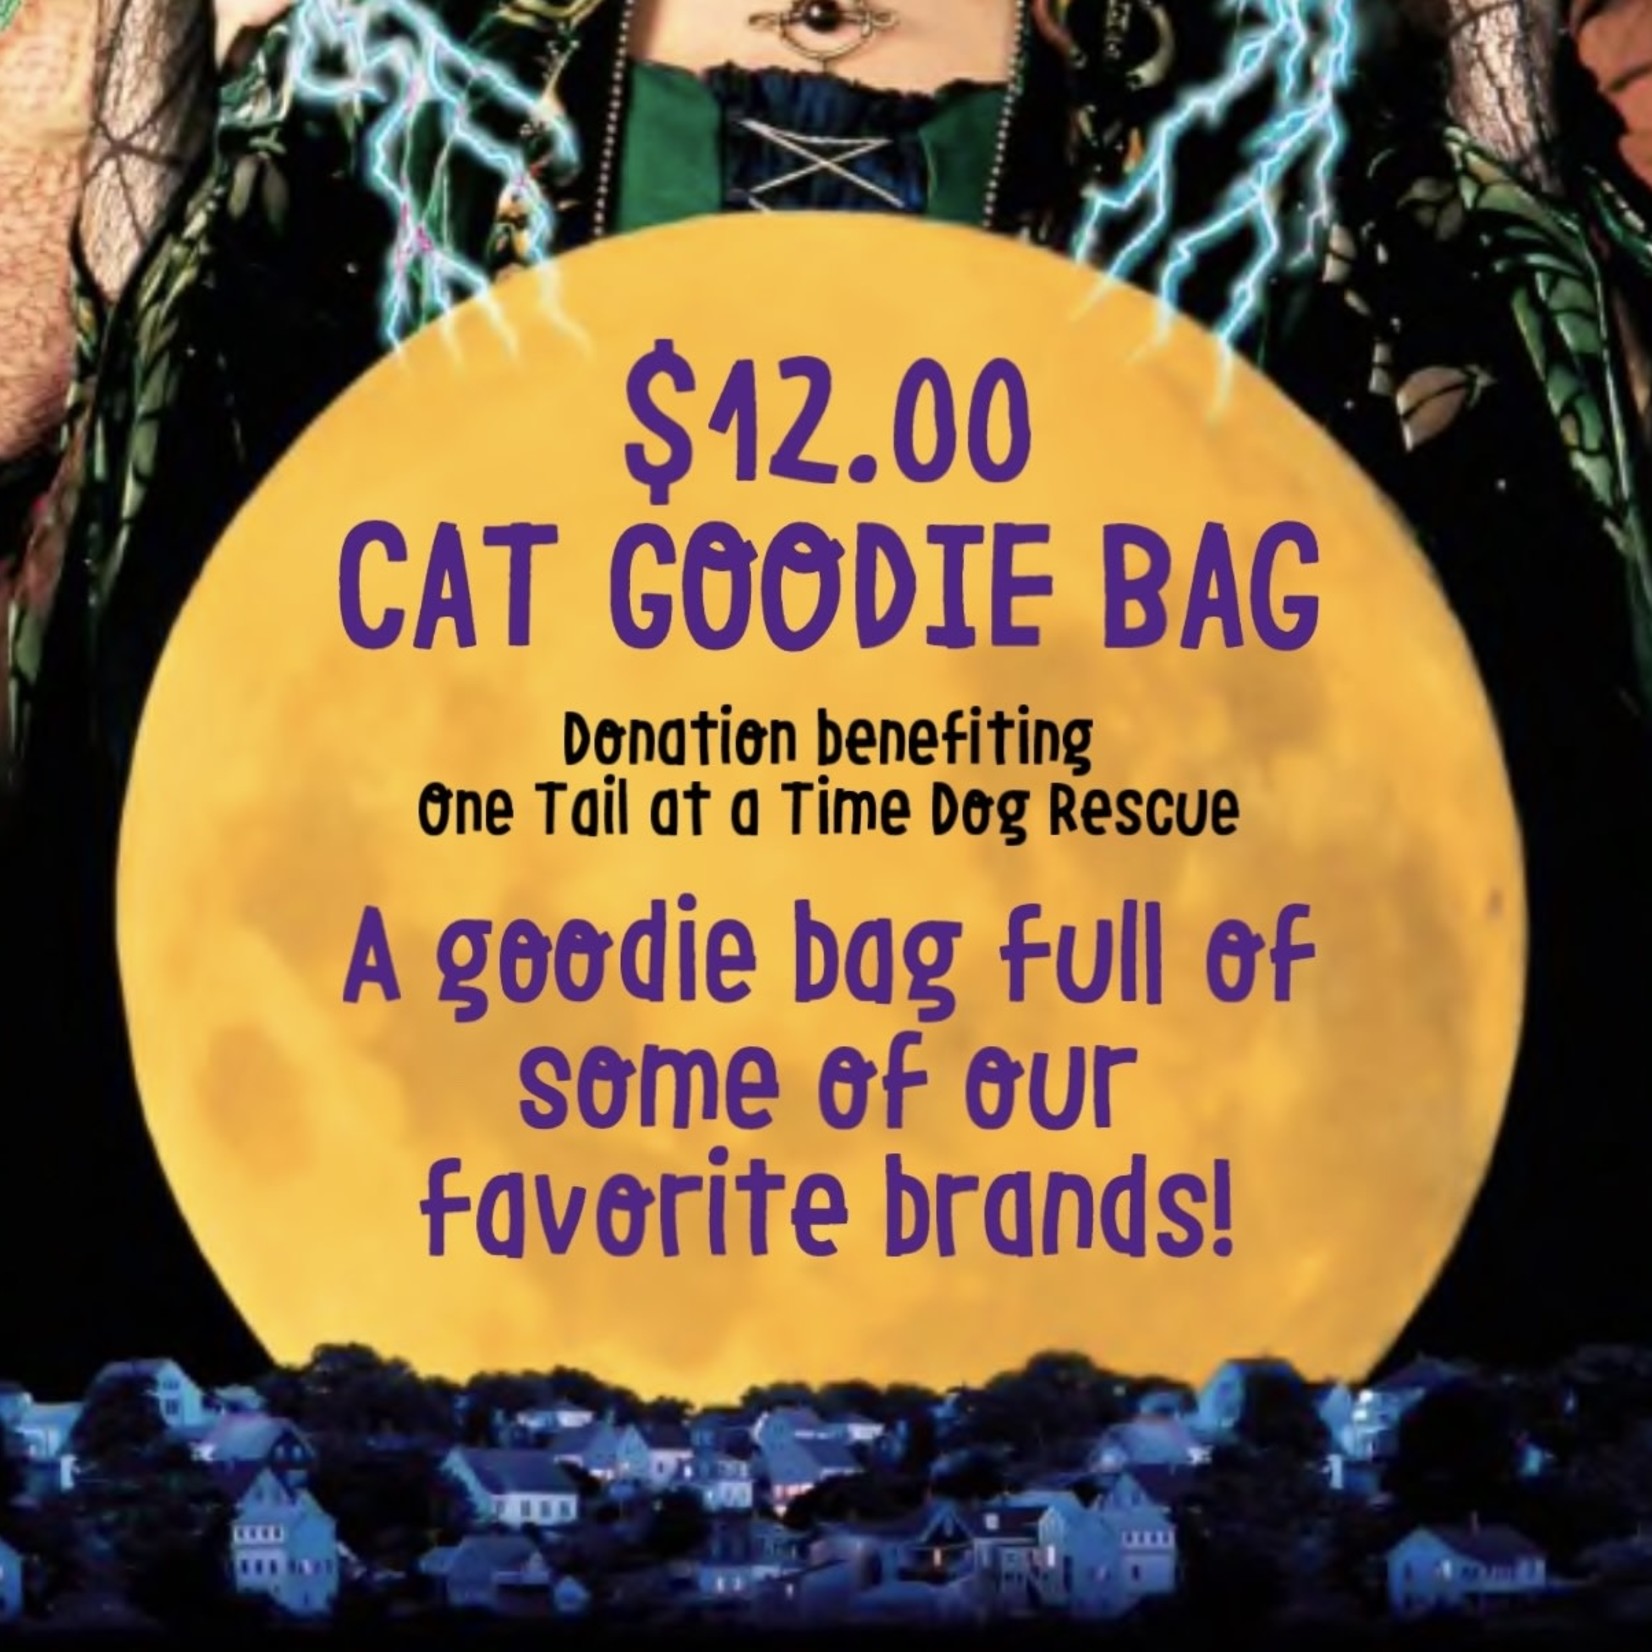 Halloween CAT Goodie Bag benefiting One Tail at a Time